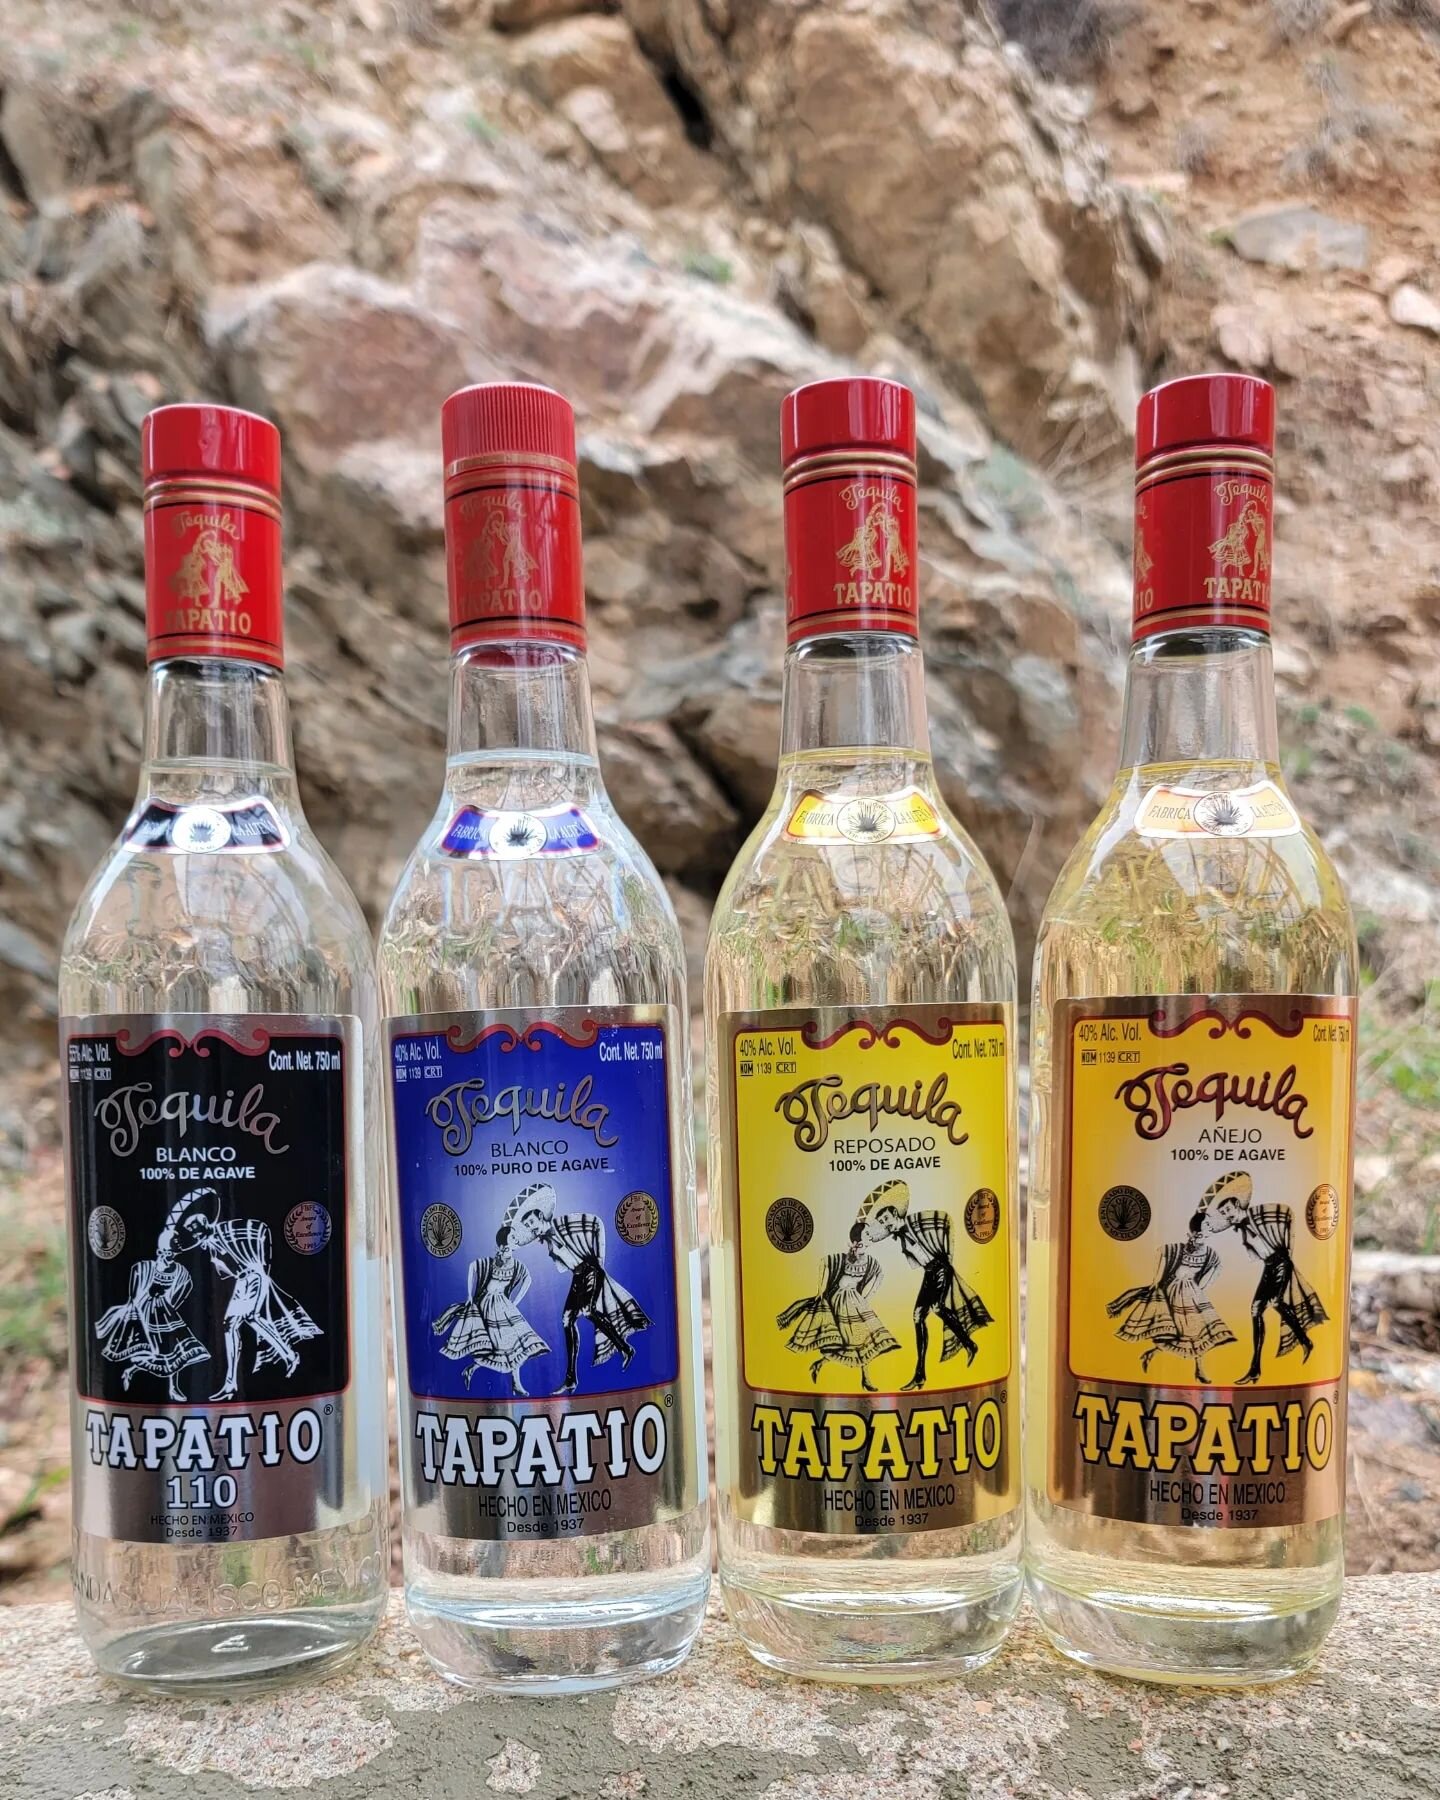 Happy Cinco De Mayo and Tasting Day!!! 🎉🎊
___________________________

Our friend Jason from @maverickbevco will be in tonight from 4-6 teaching and pouring up everything delicious from Tapatio to Real Del Valle tequila!!! Margarita tasters with sa